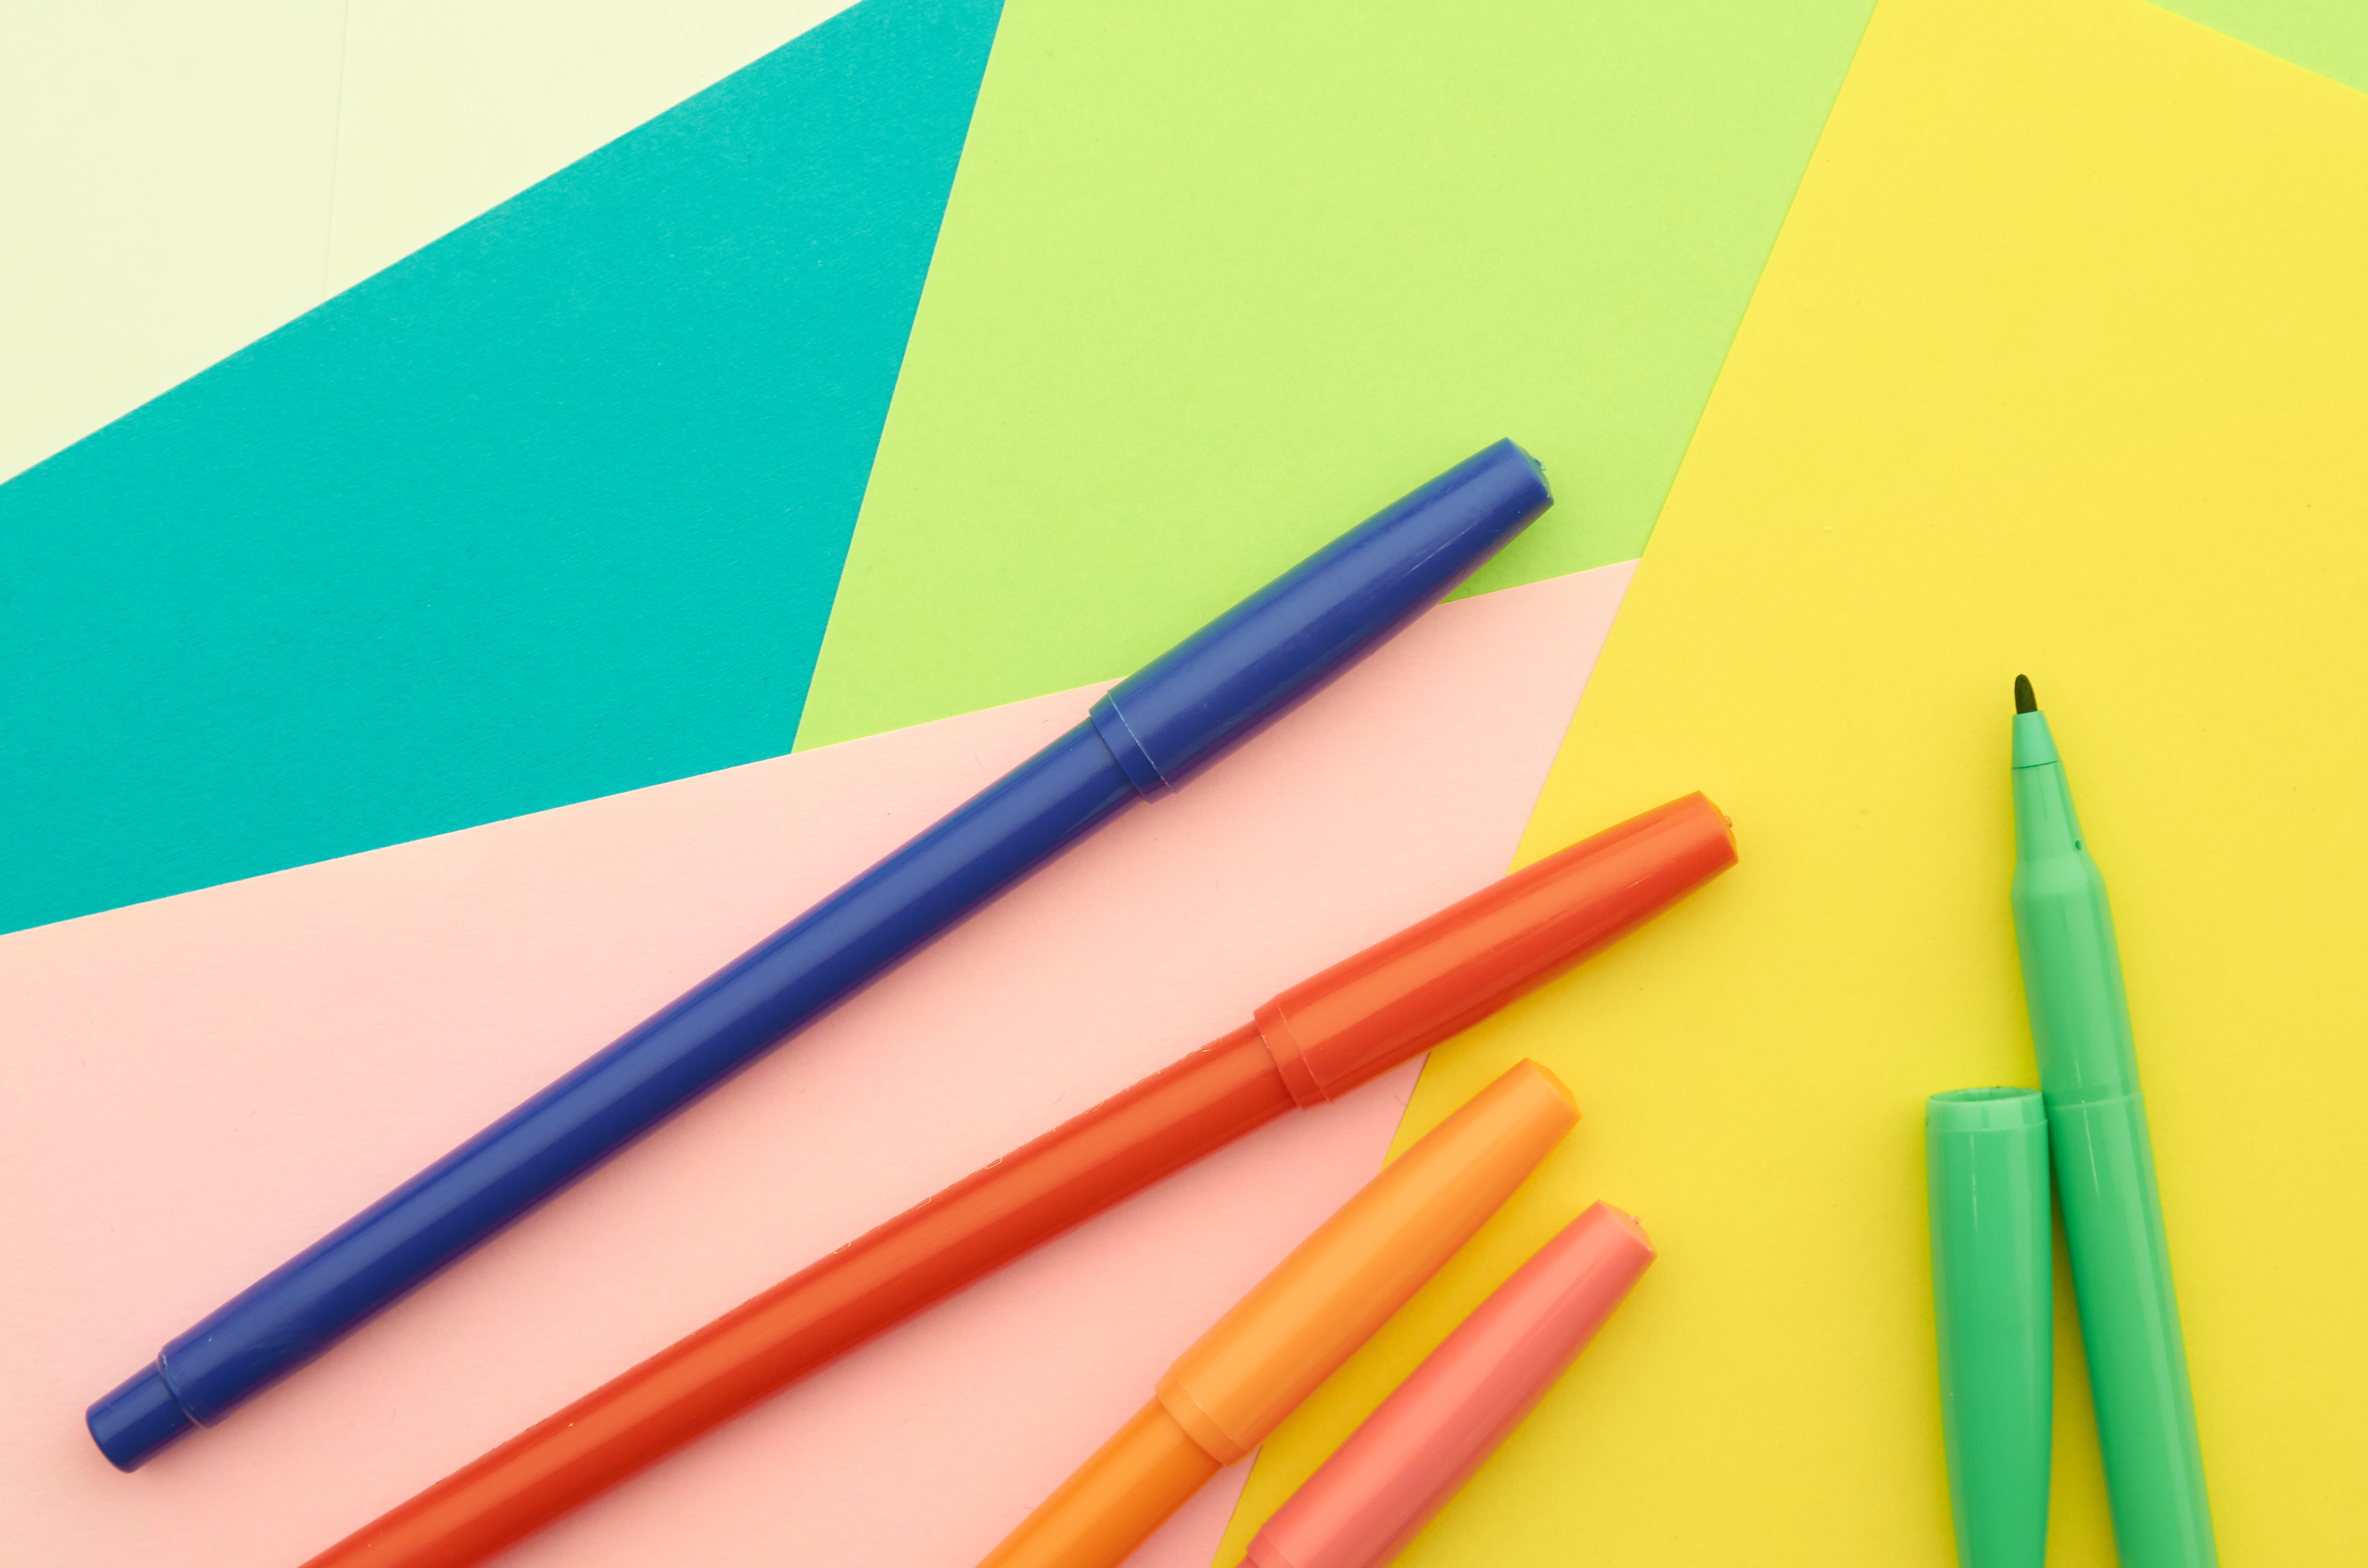 Multicolored Pens Layout - Stock Photos